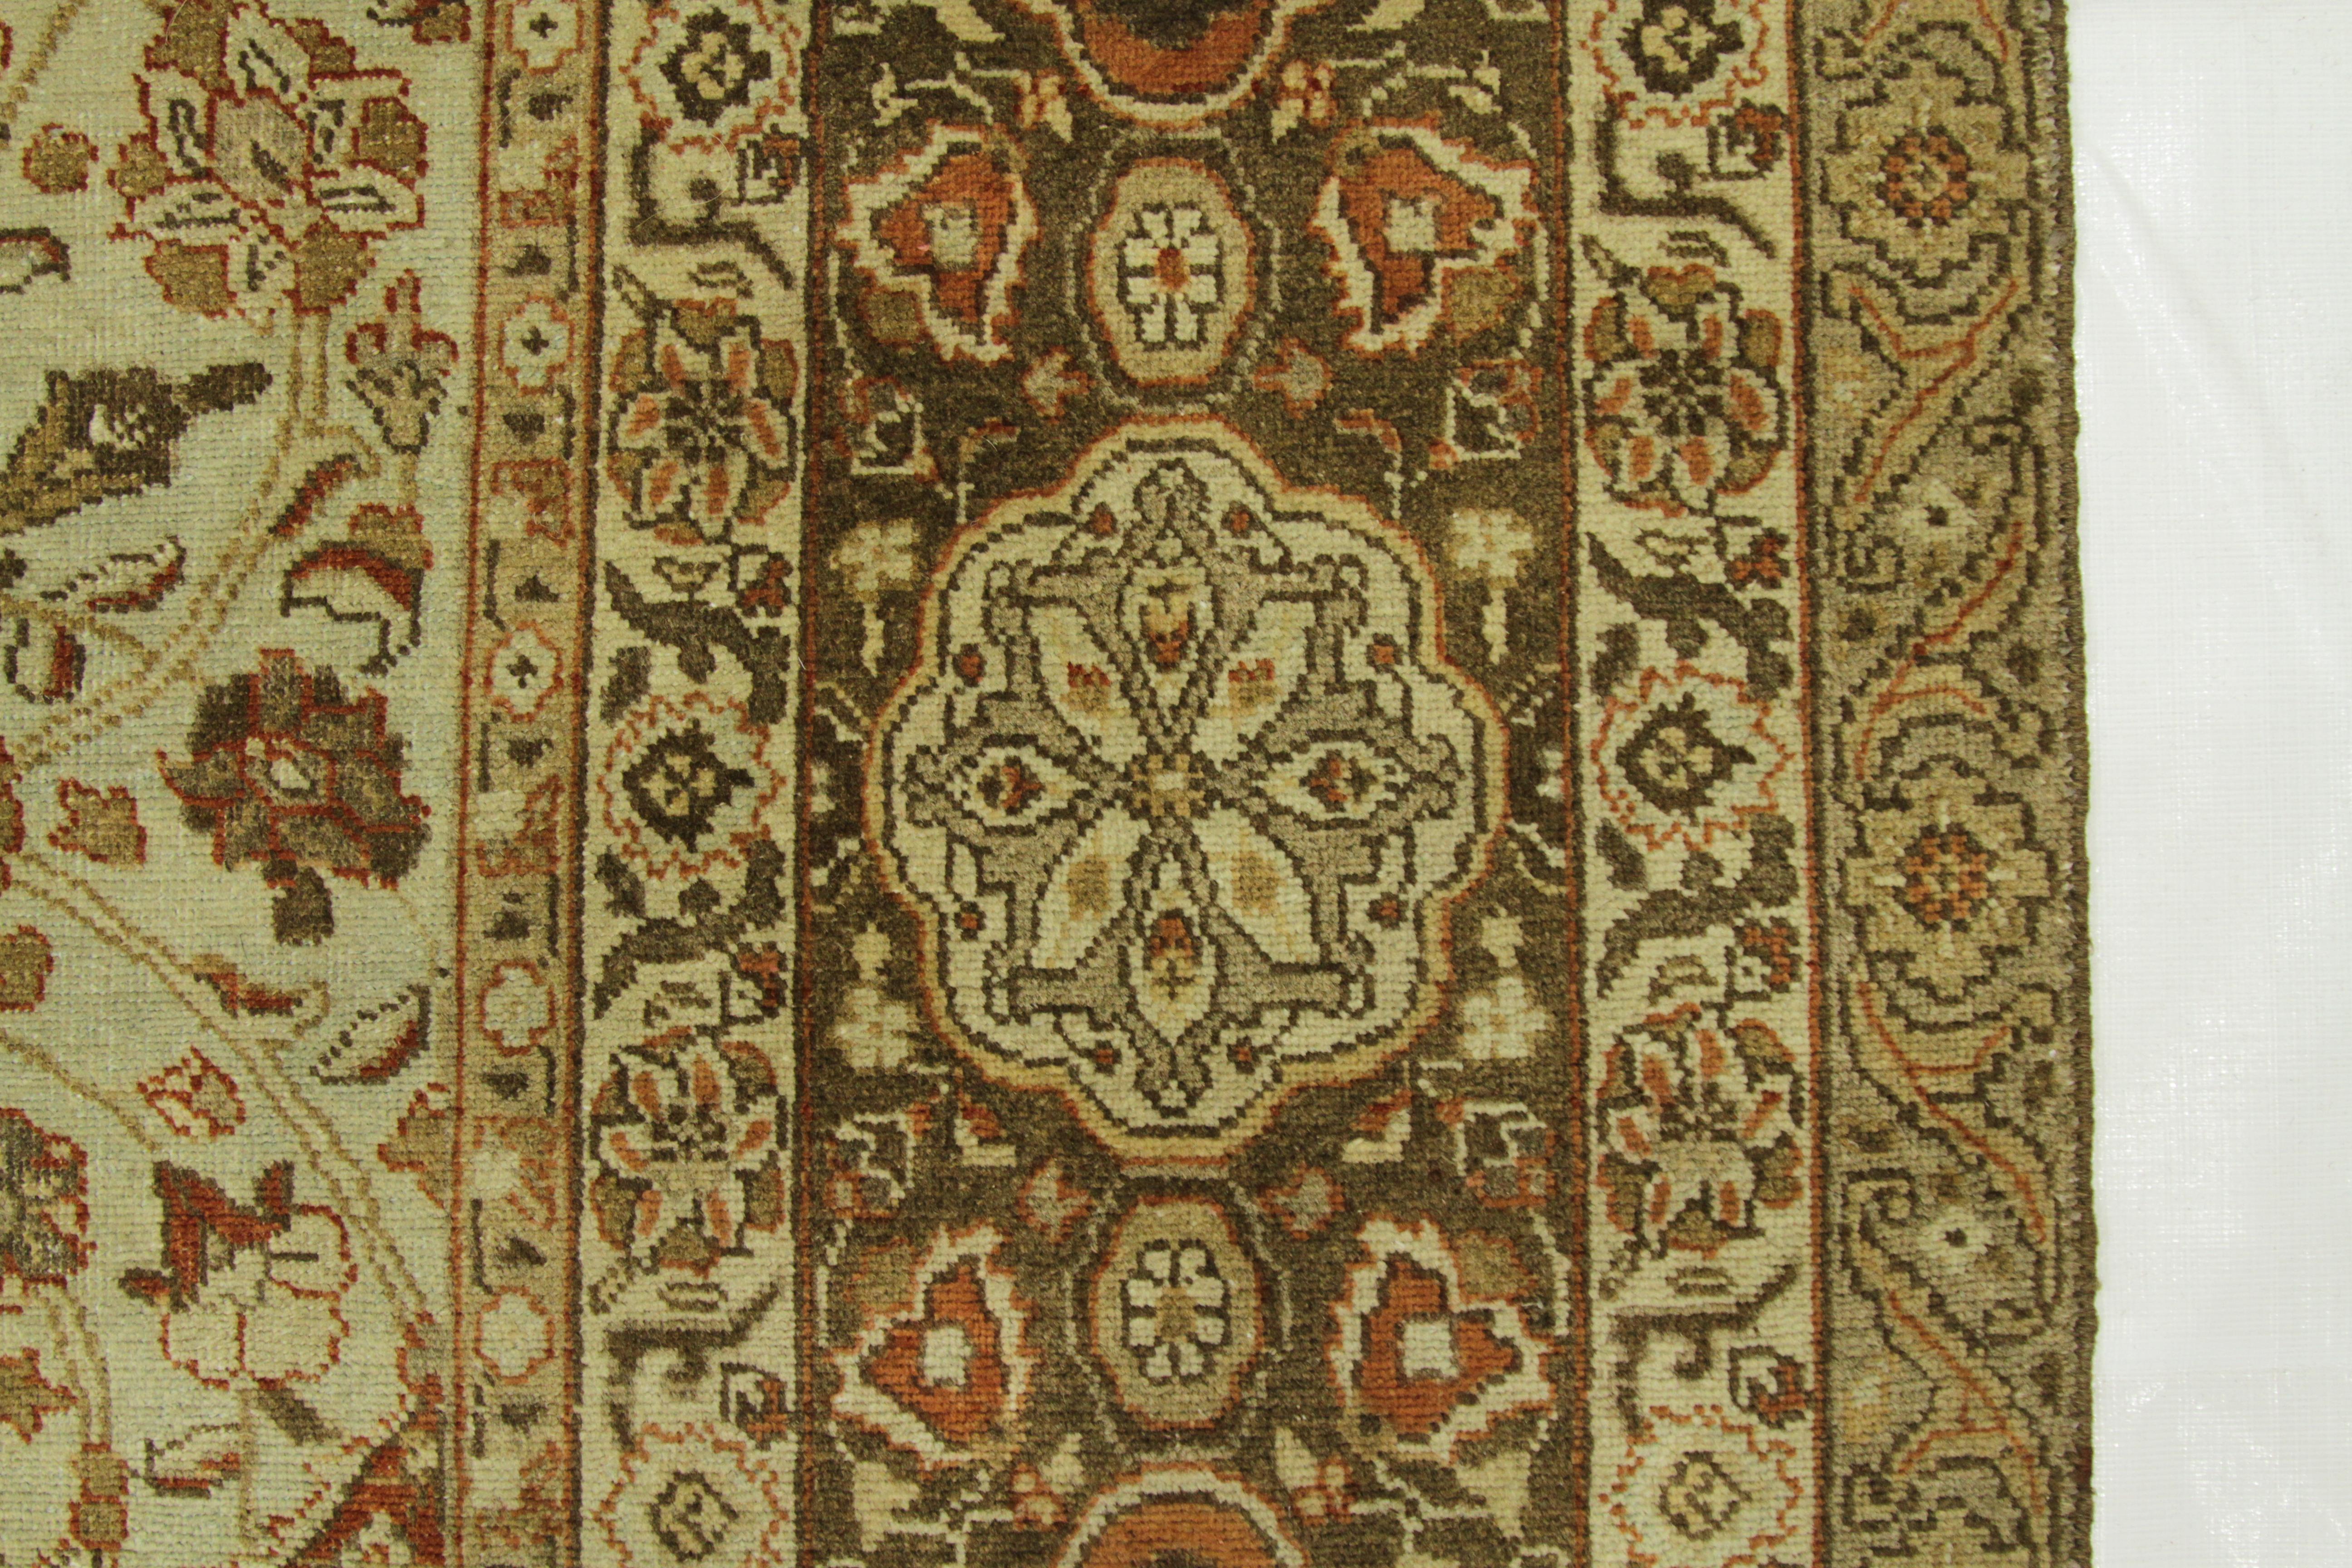  1930s Oversized Antique Persian Tabriz Rug with Ornate Tribal Patterns For Sale 2